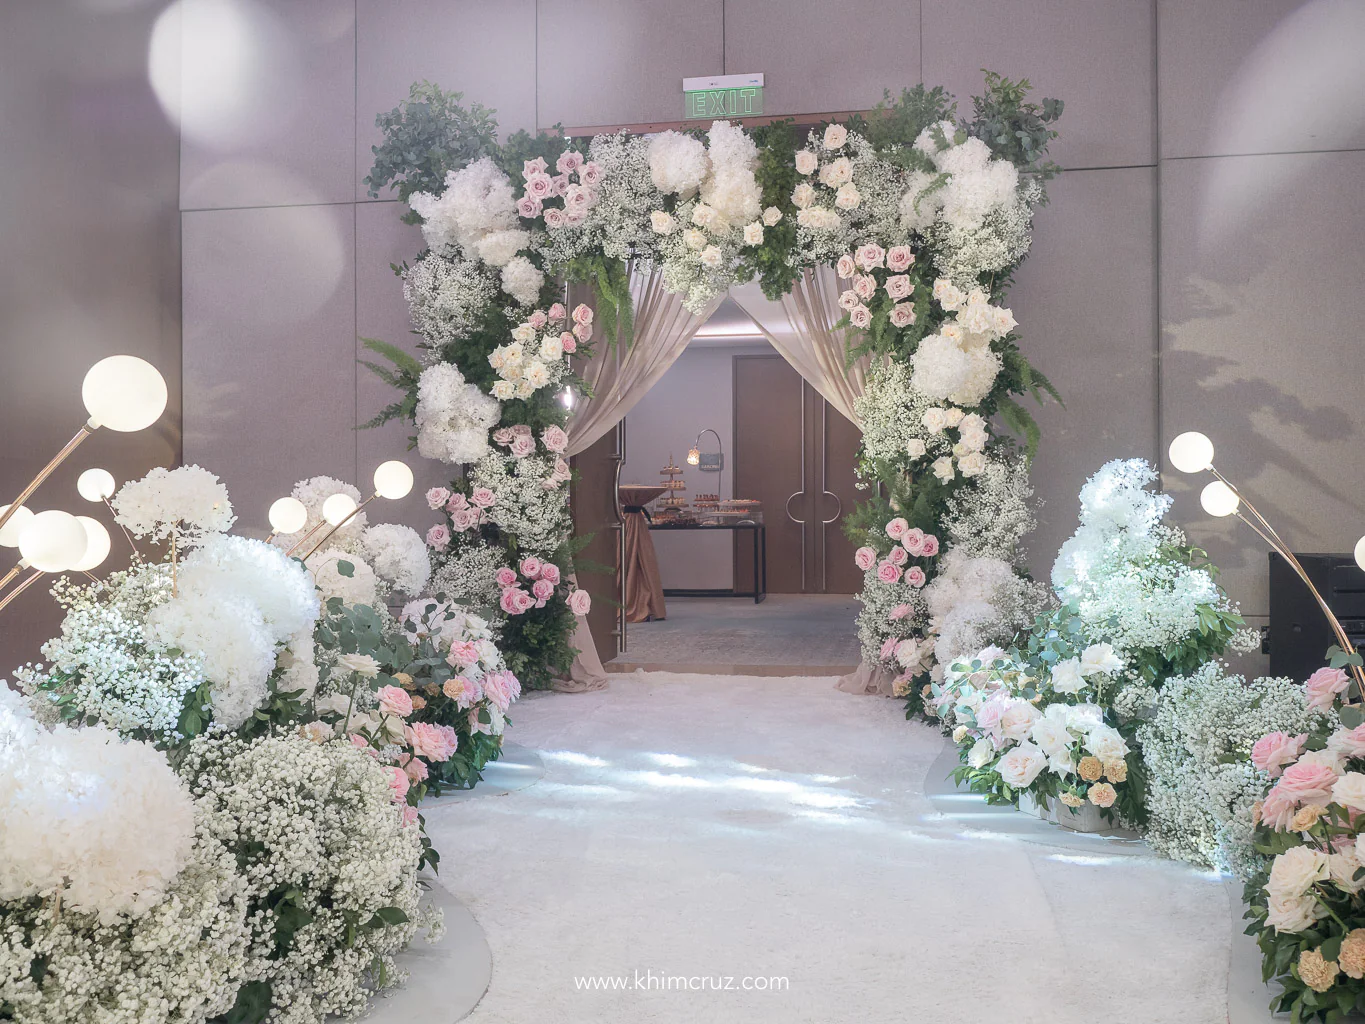 floral arch entrance for a garden-inspired intimate wedding reception